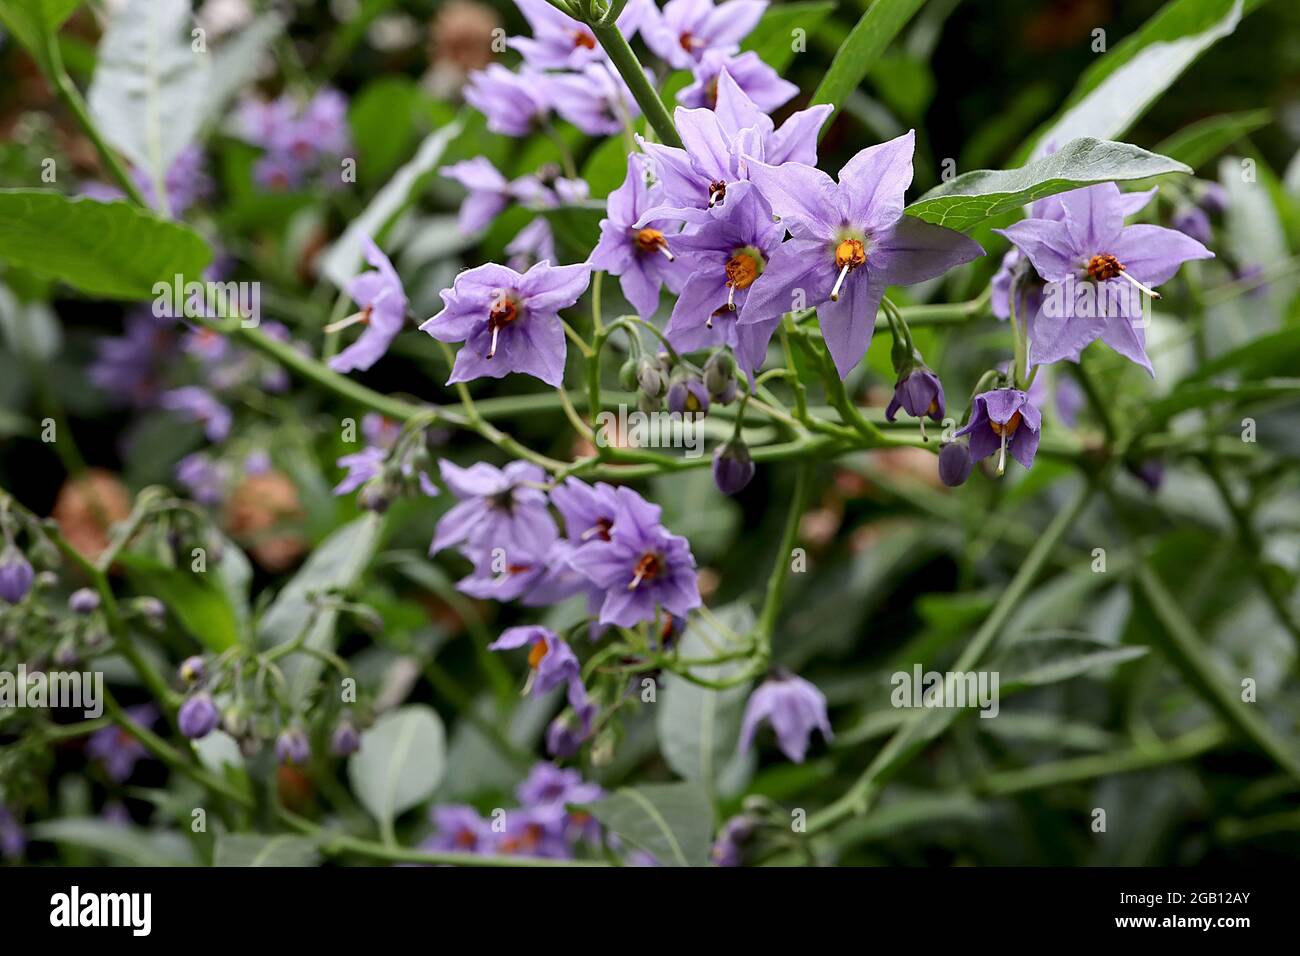 Solanum crispum ‘Glasnevin’ potato tree Glasnevin – clusters of lavender mauve star-shaped flowers with fused yellow stamens, June, England, UK Stock Photo